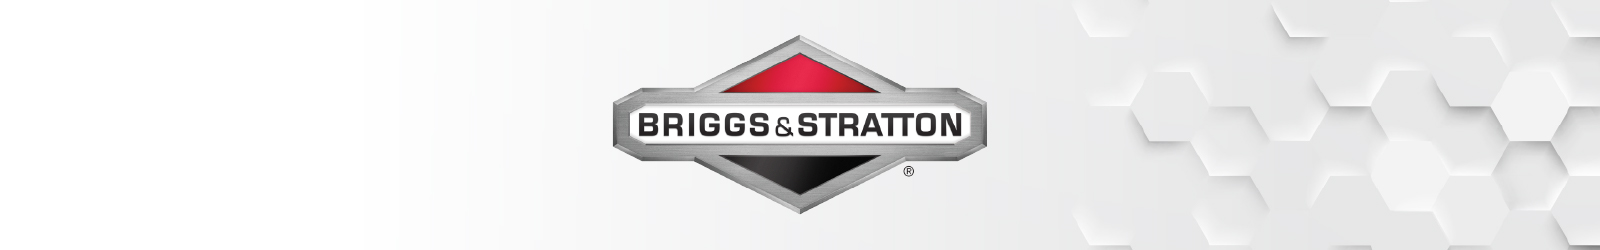 Briggs & Stratton Product Images and Videos